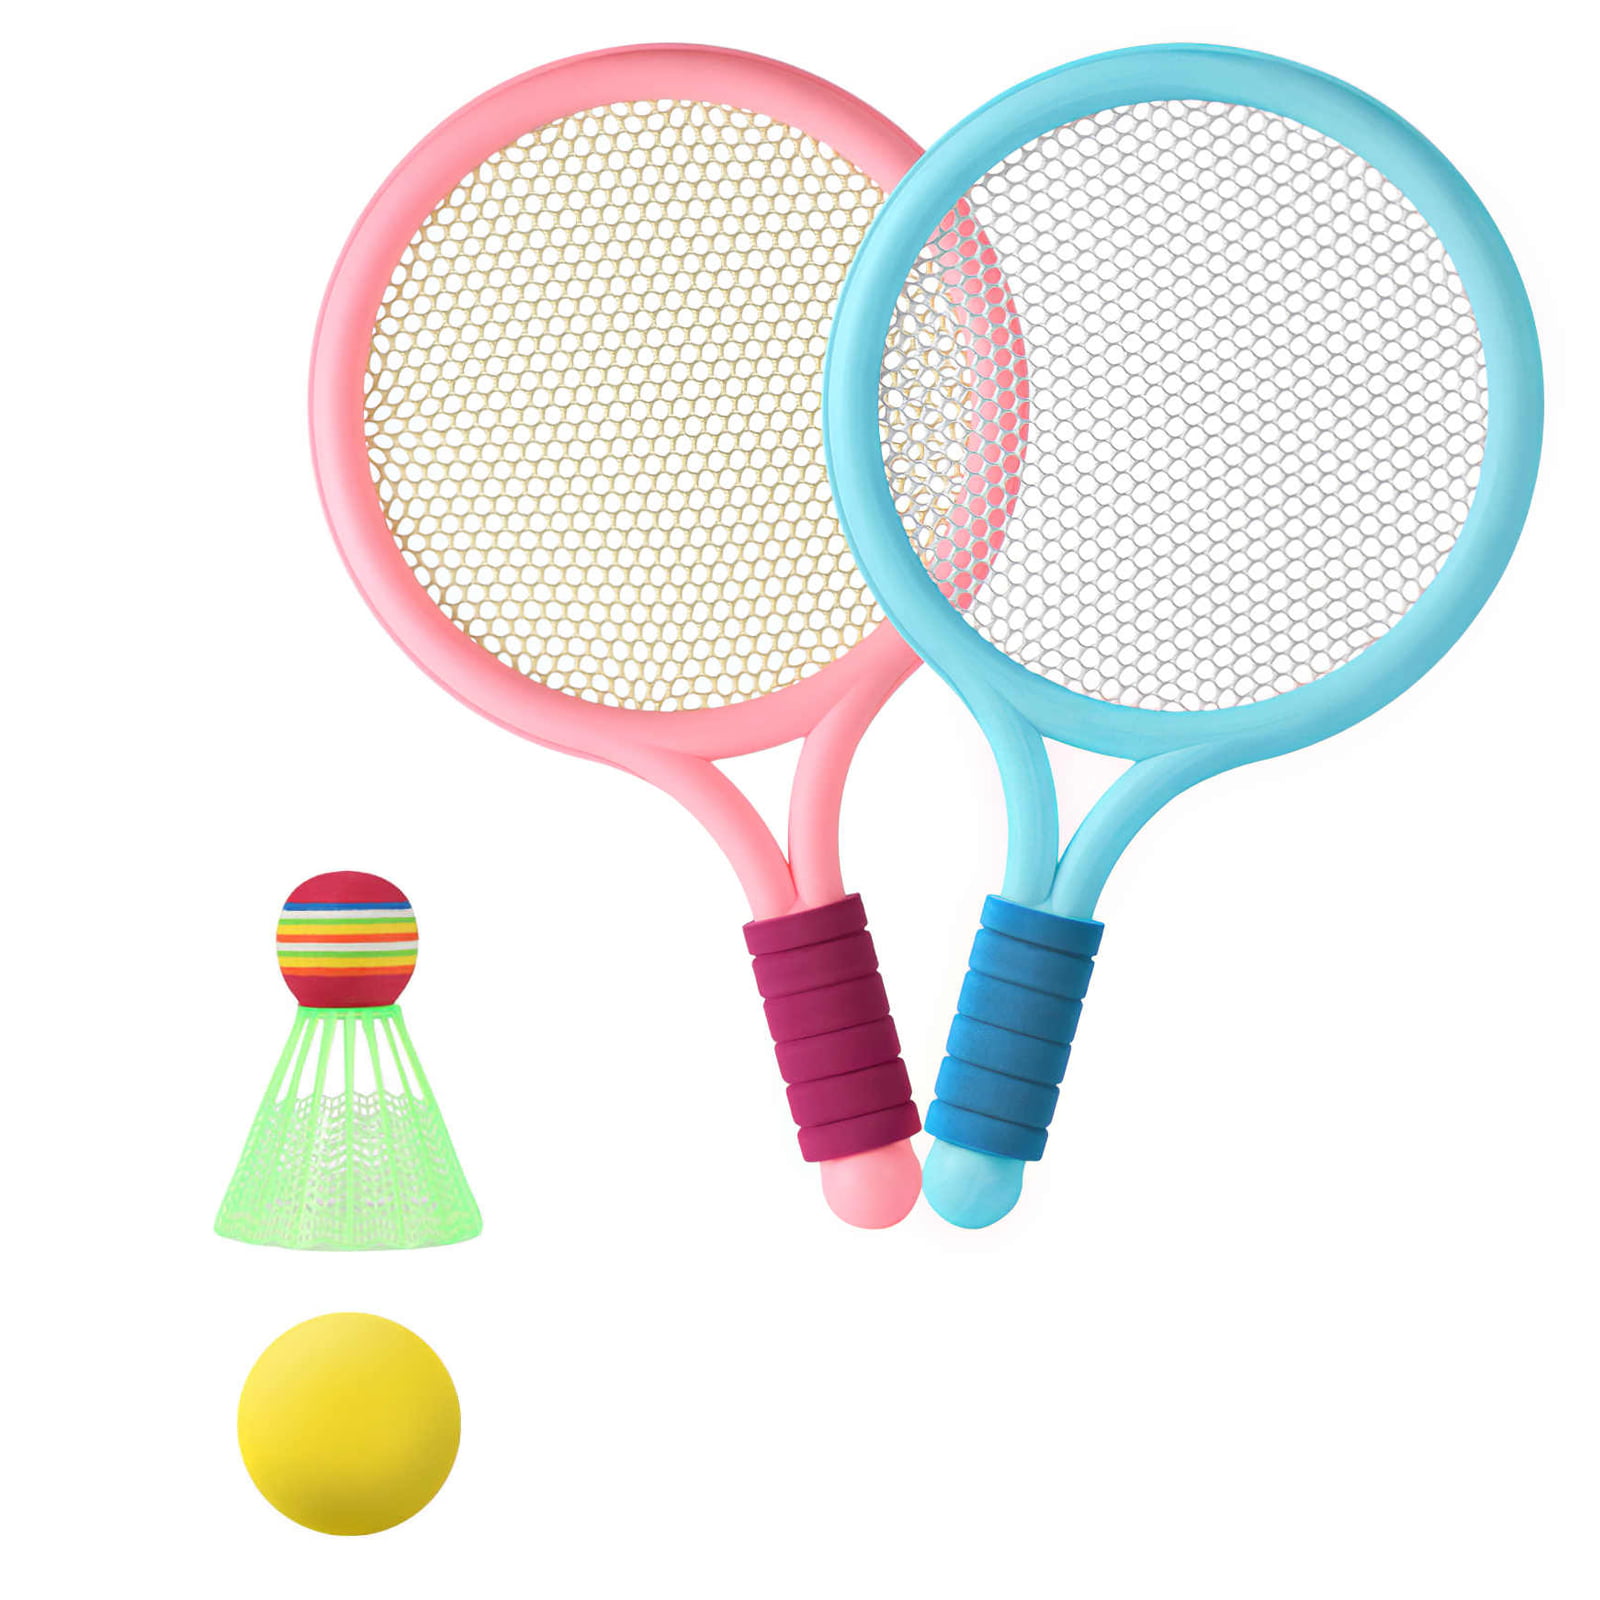 Details about   Kids Badminton and Tennis Play Set with Easy to Grip Colorful Rackets Beach